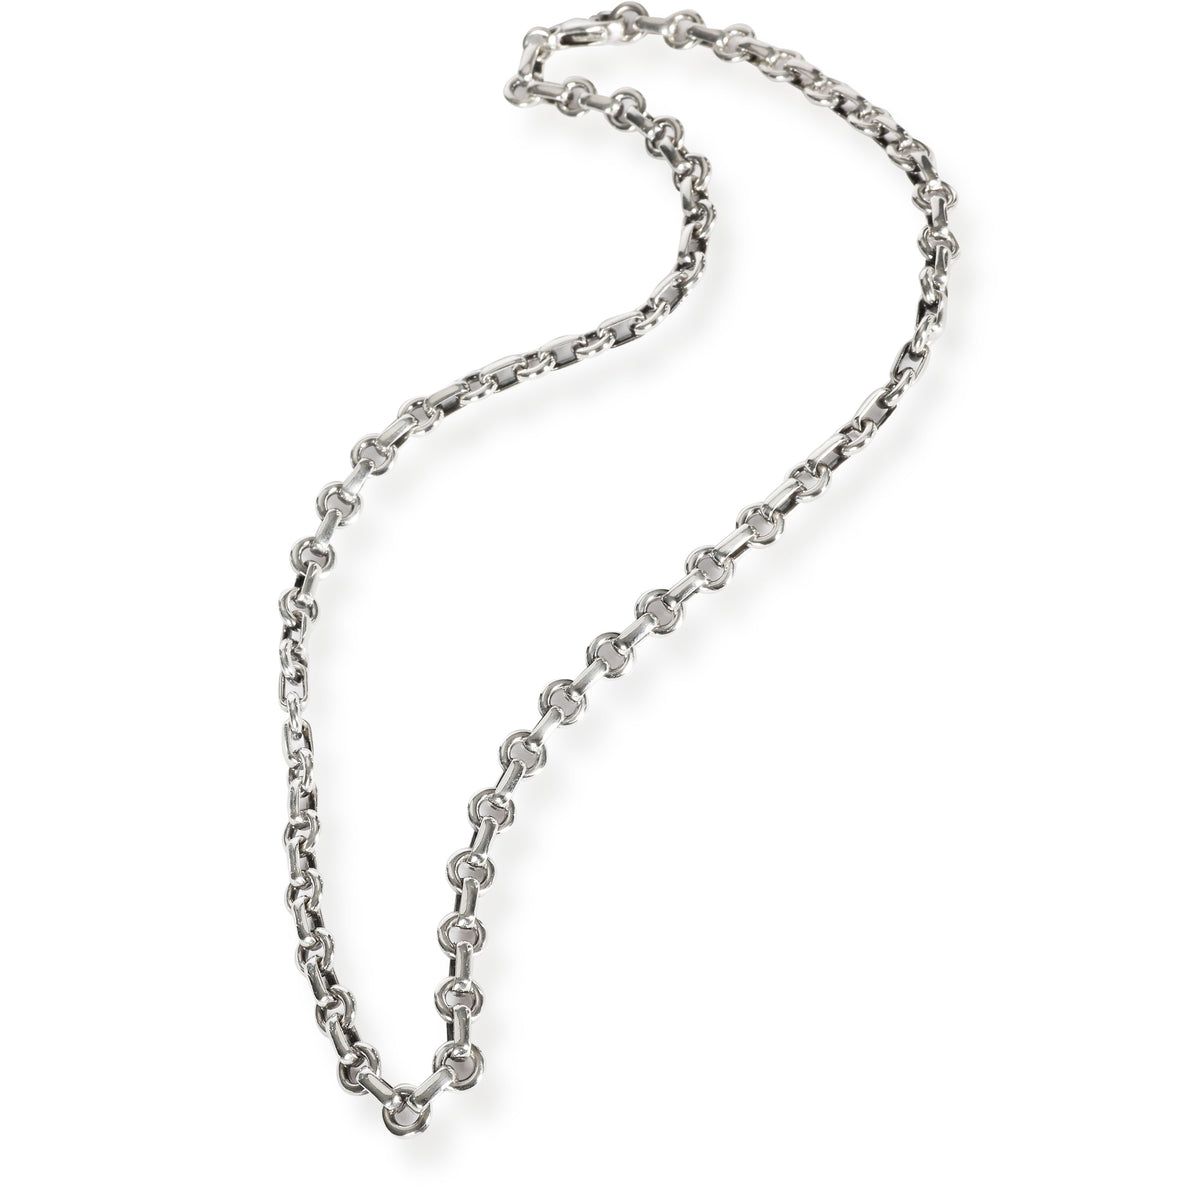 Tiffany & Co. Oval Link Chain Necklace in  Sterling Silver